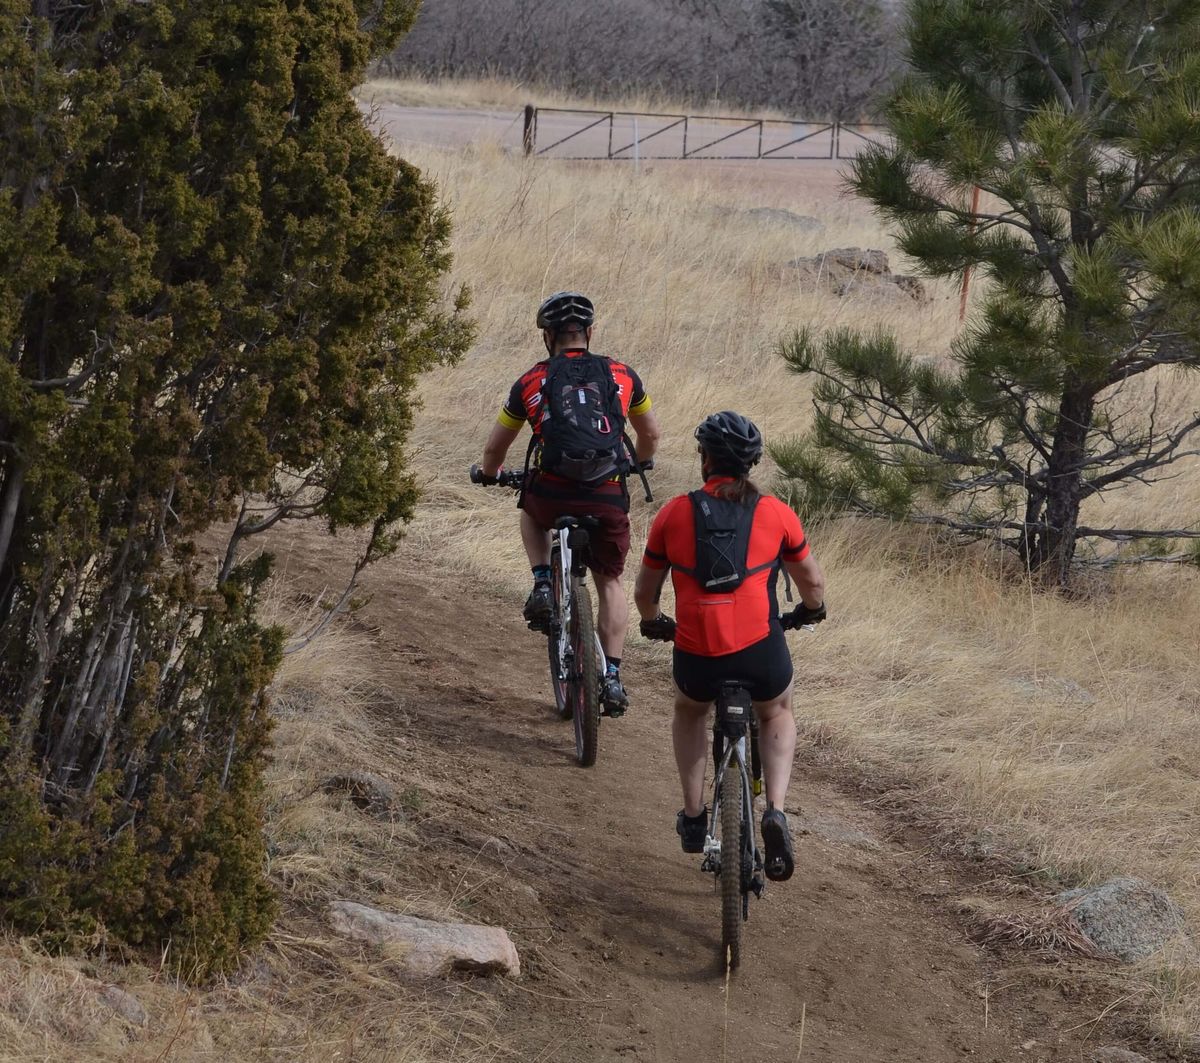 Beginner\u2019s Level 1 Mountain Bike Lesson (Use Link to Sign Up)